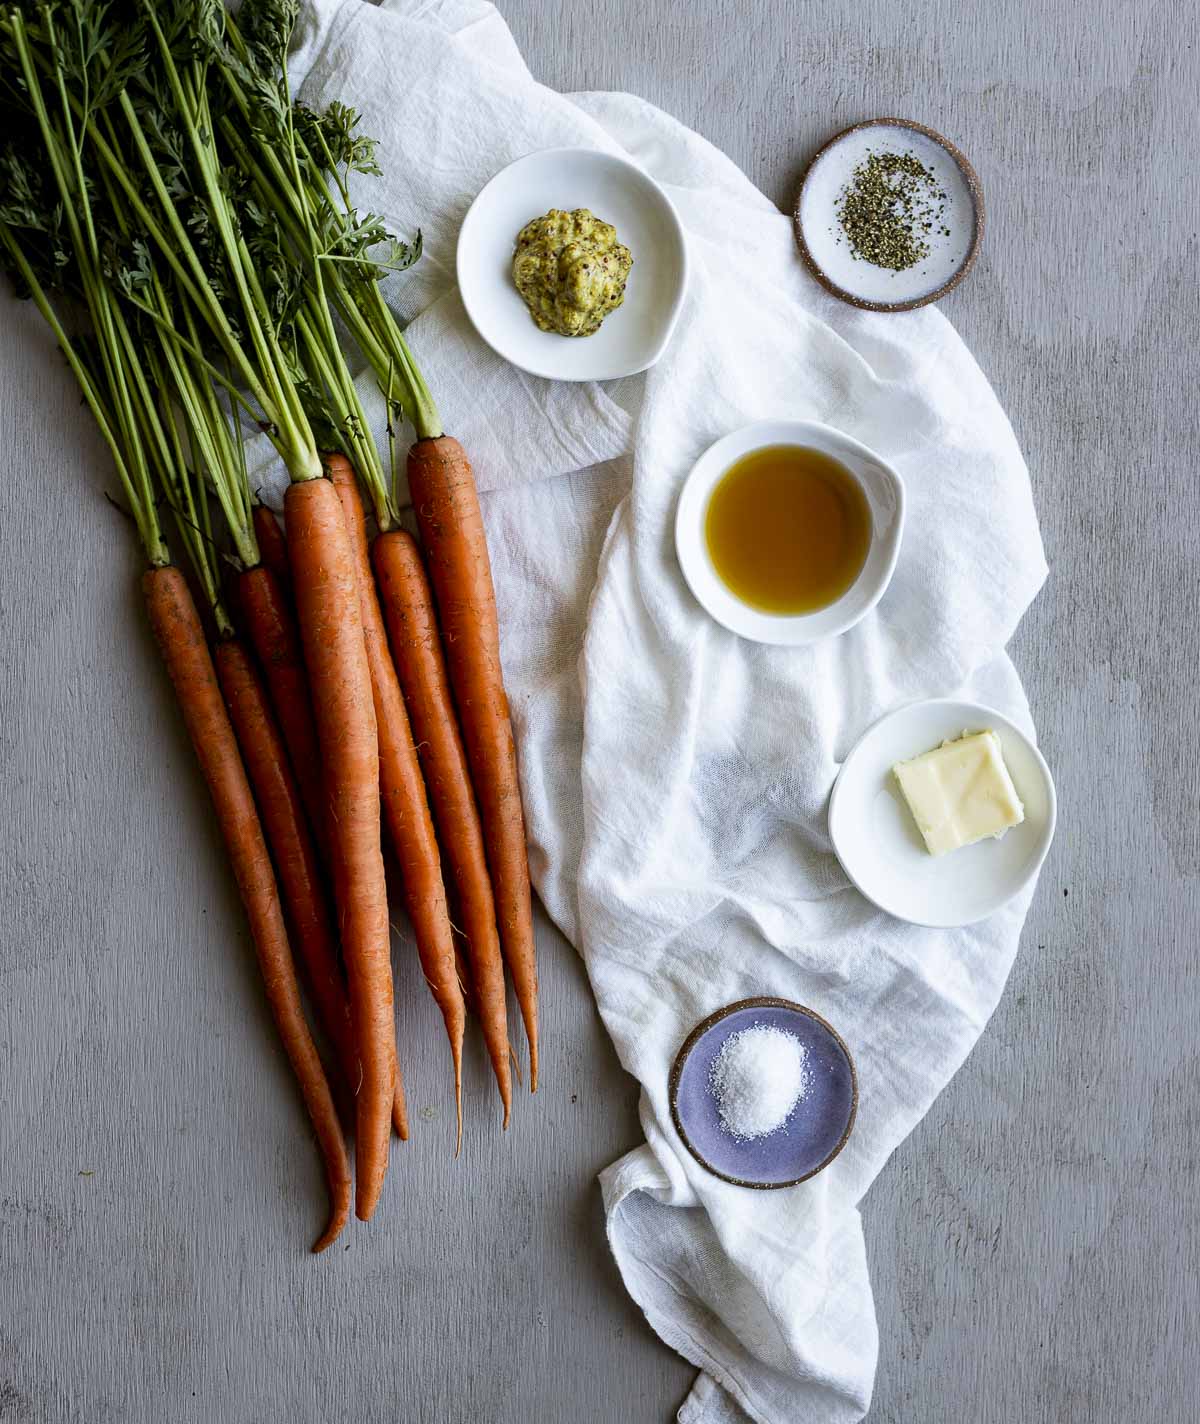 Ingredients to make sous vide carrots arranged individually on a white cloth.